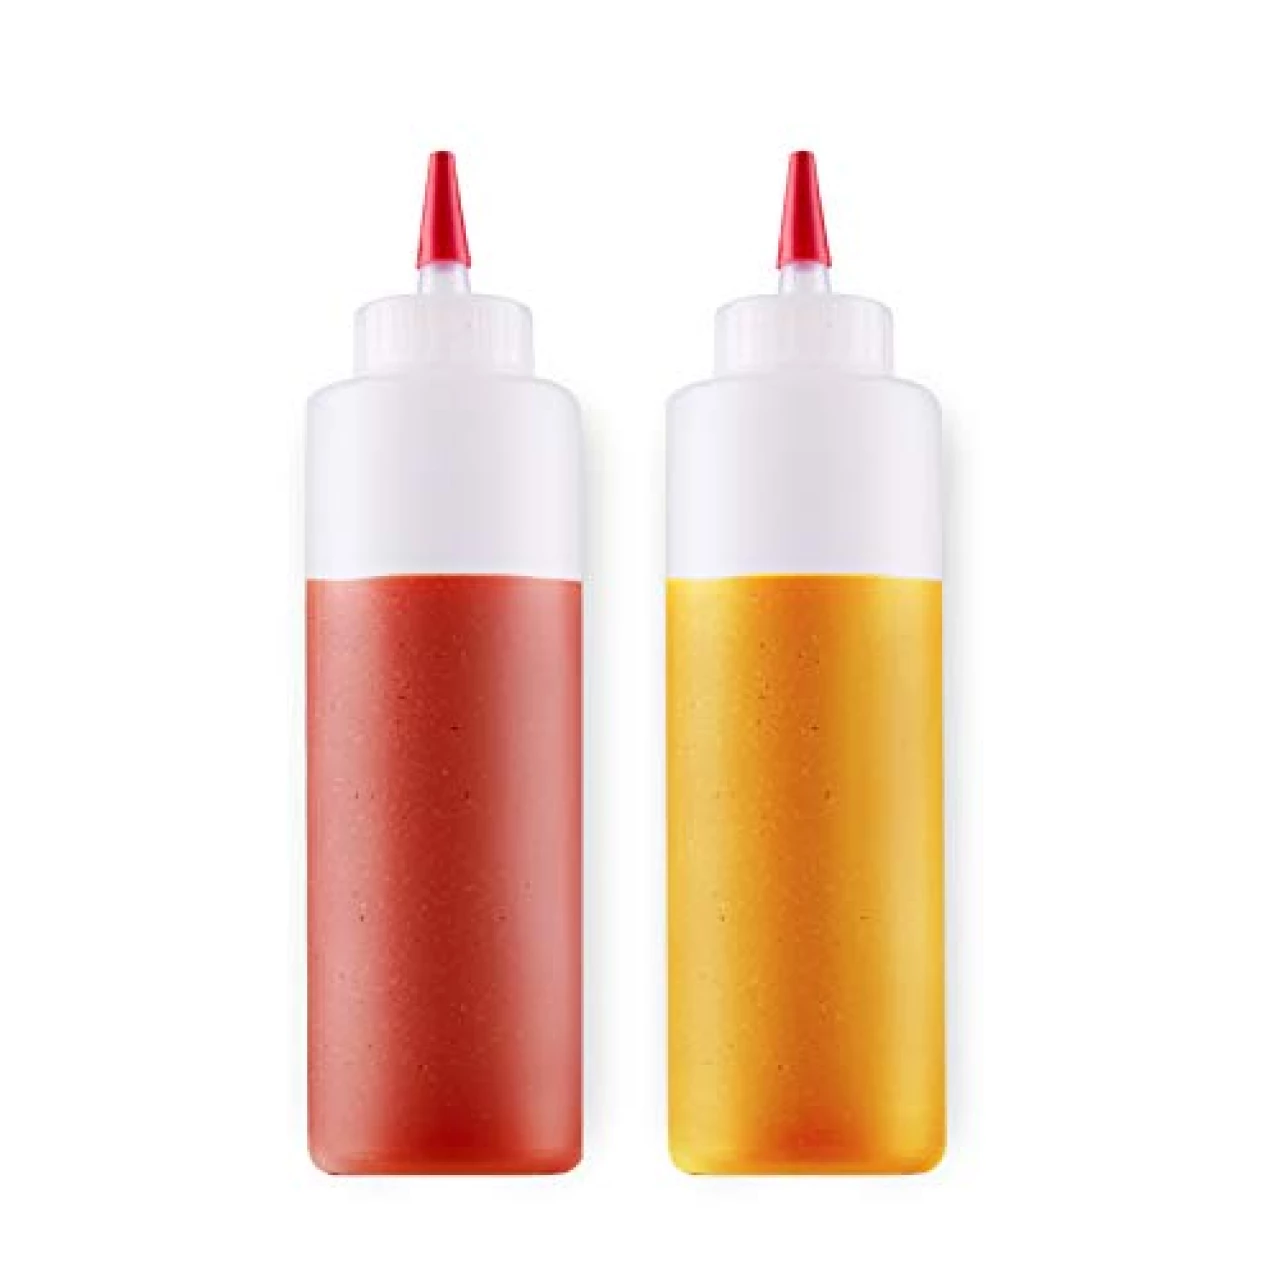 BOTTLIFY 16oz Squeeze Bottles with Red Cap-Pack of 2 Wide Mouth, Leak Proof Refillable Condiment Container for Kitchen Use